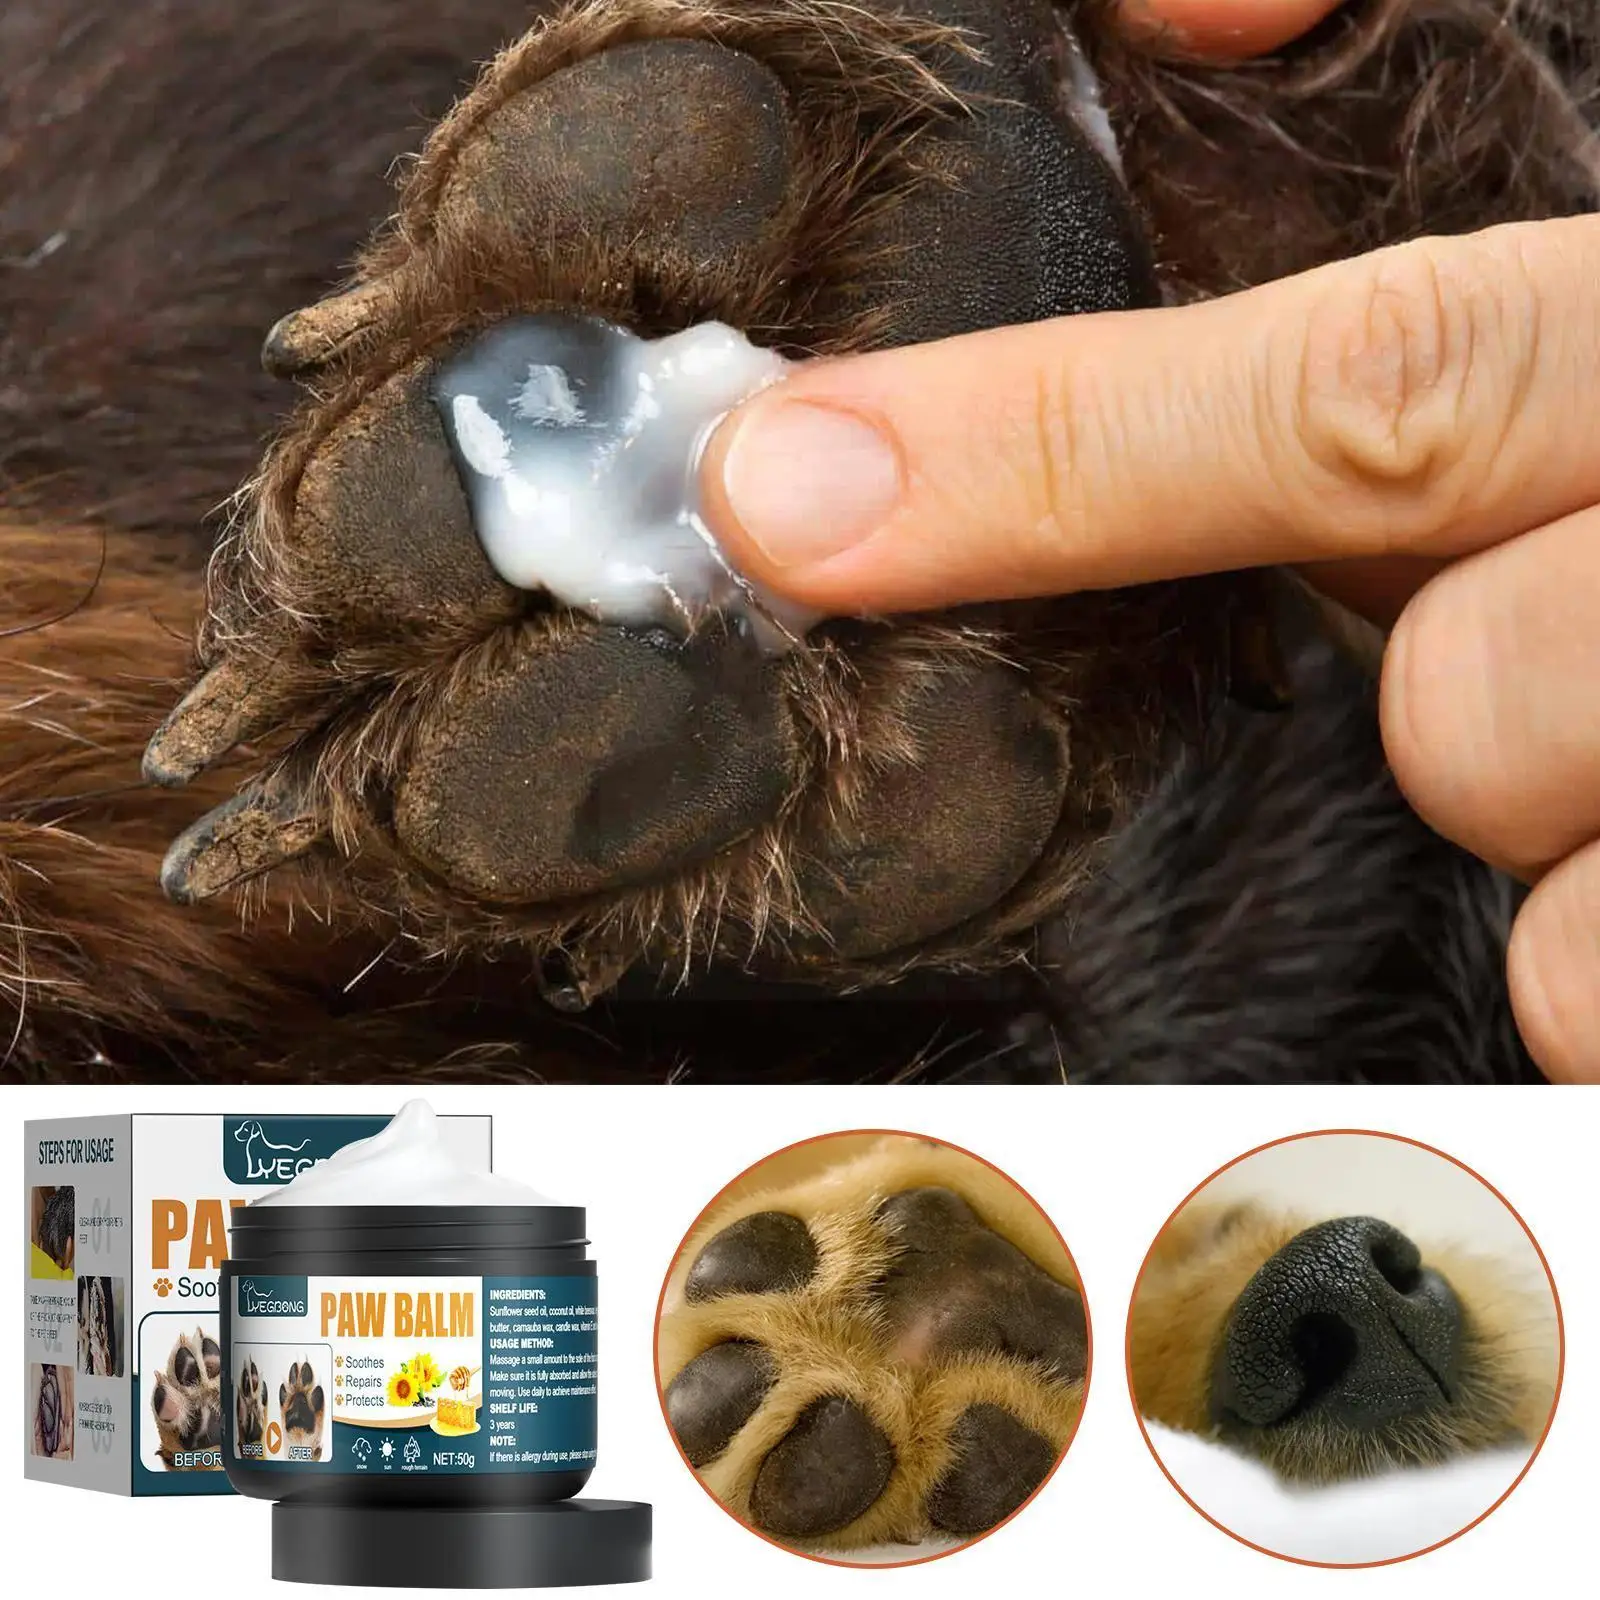 50g Pet Paw Care Cream Healthy Pet Paw Balm Pet Foot Cat Oil Care Pad Wax Dog Balm Foot Protection Paws Balm Care Protectiv K7O9